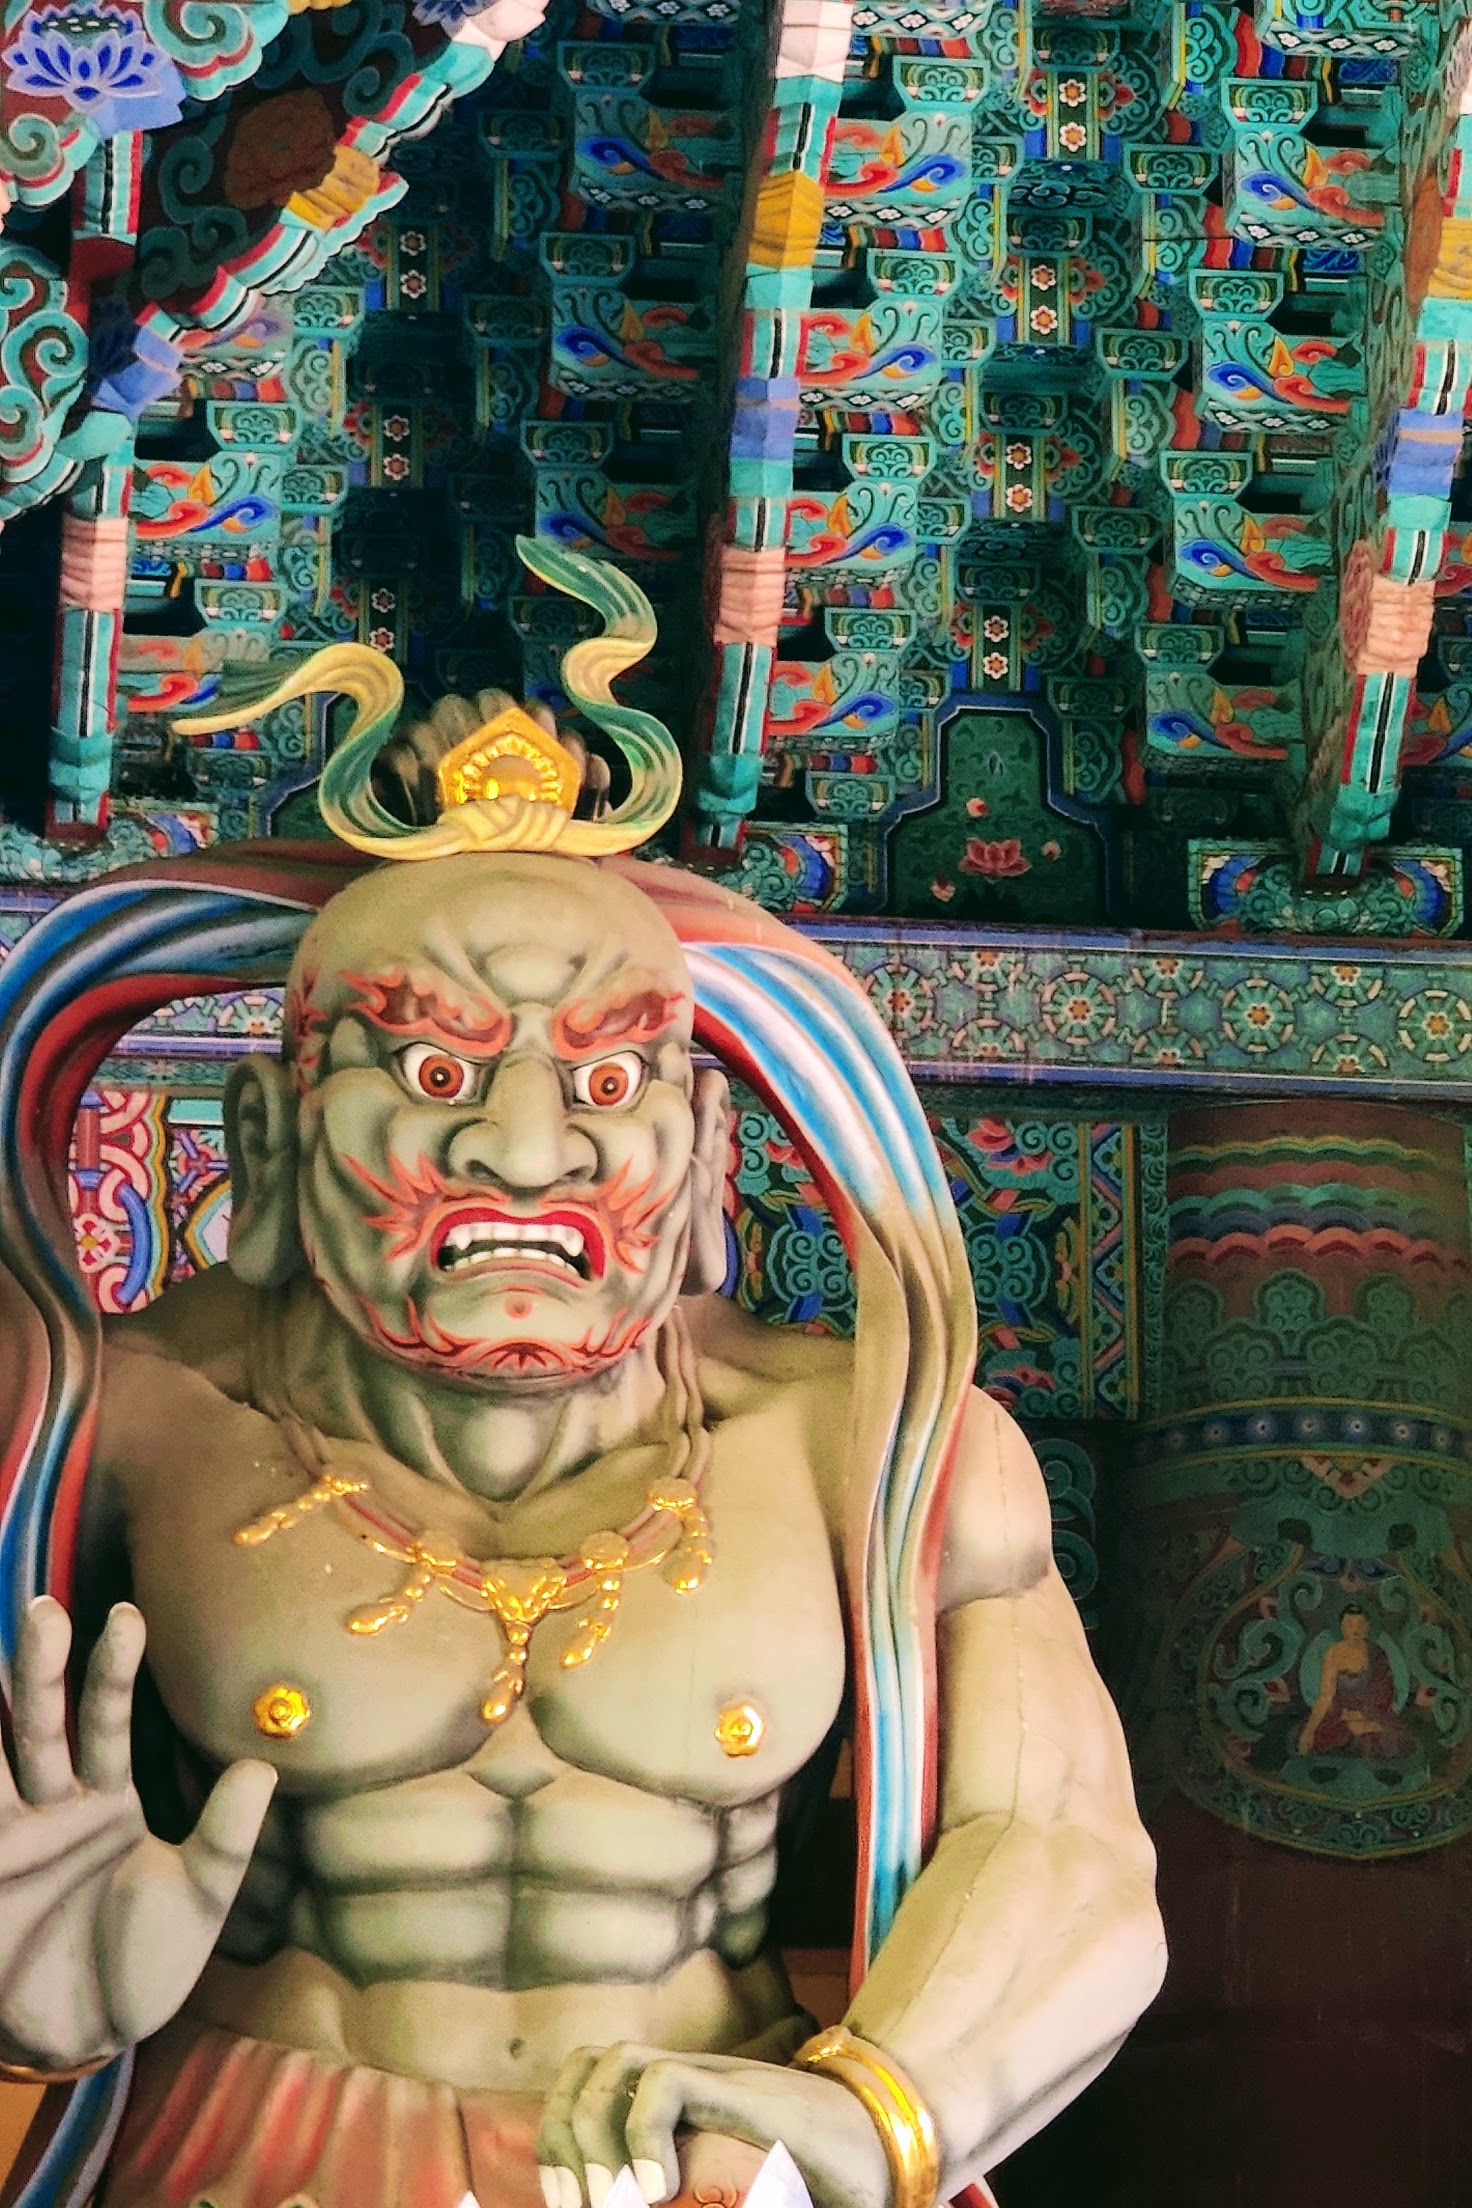 A close up image of a buddhist god known as one of the heavenly kings